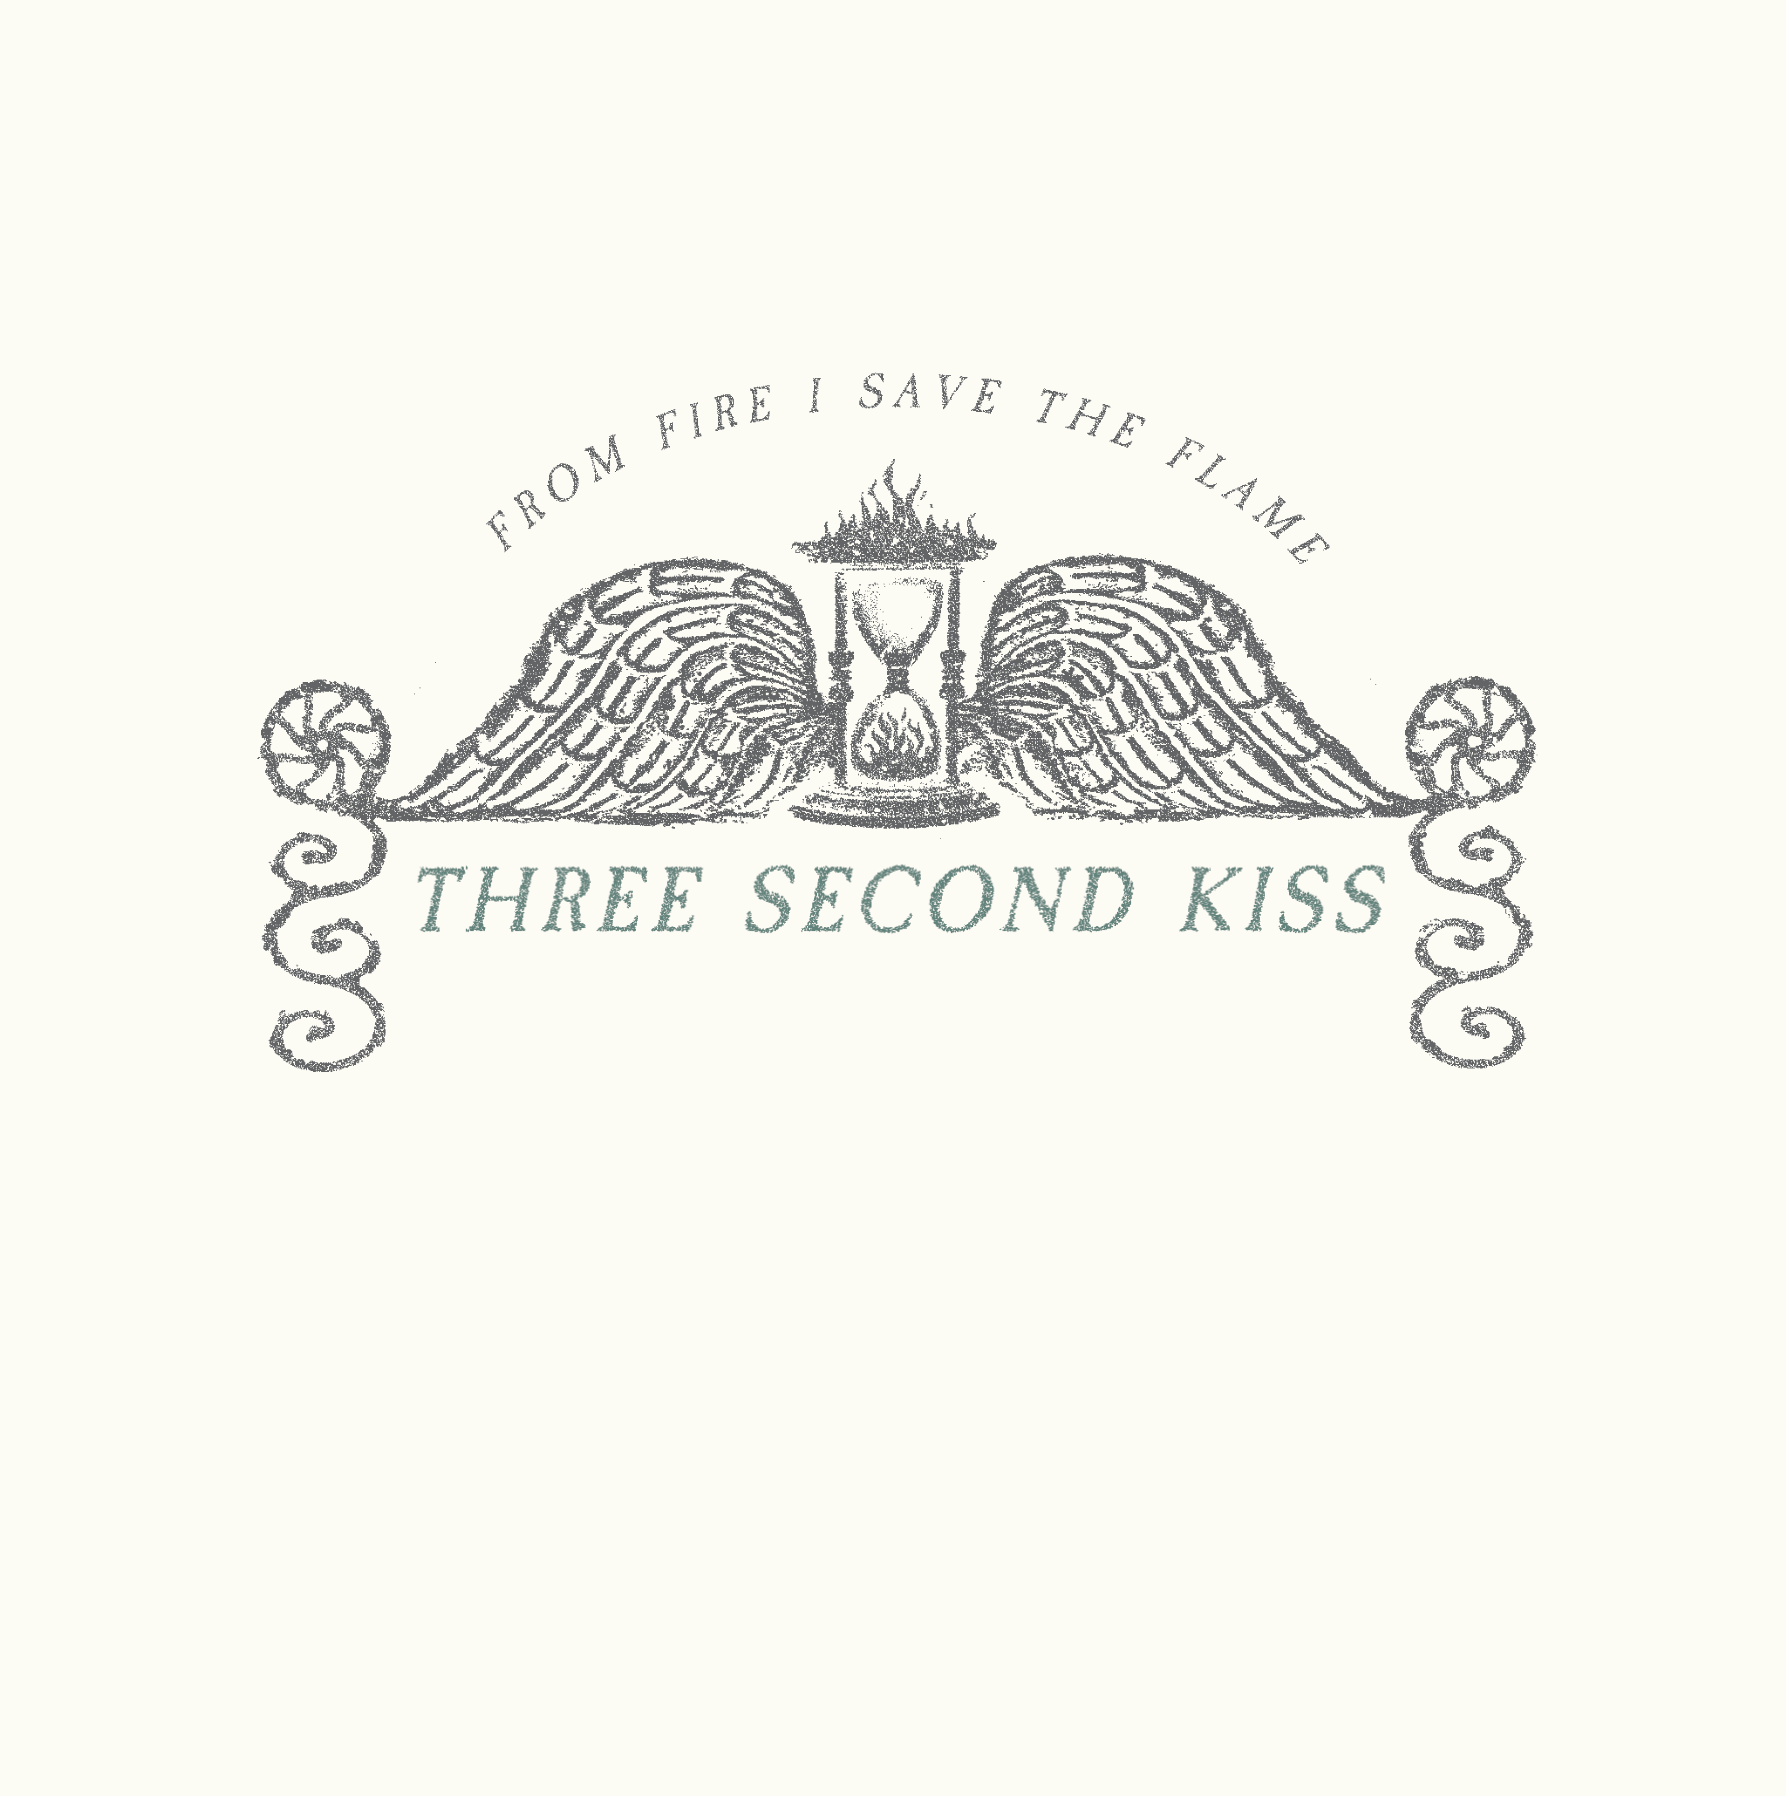 Three Second Kiss album From Fire I Save the Flame